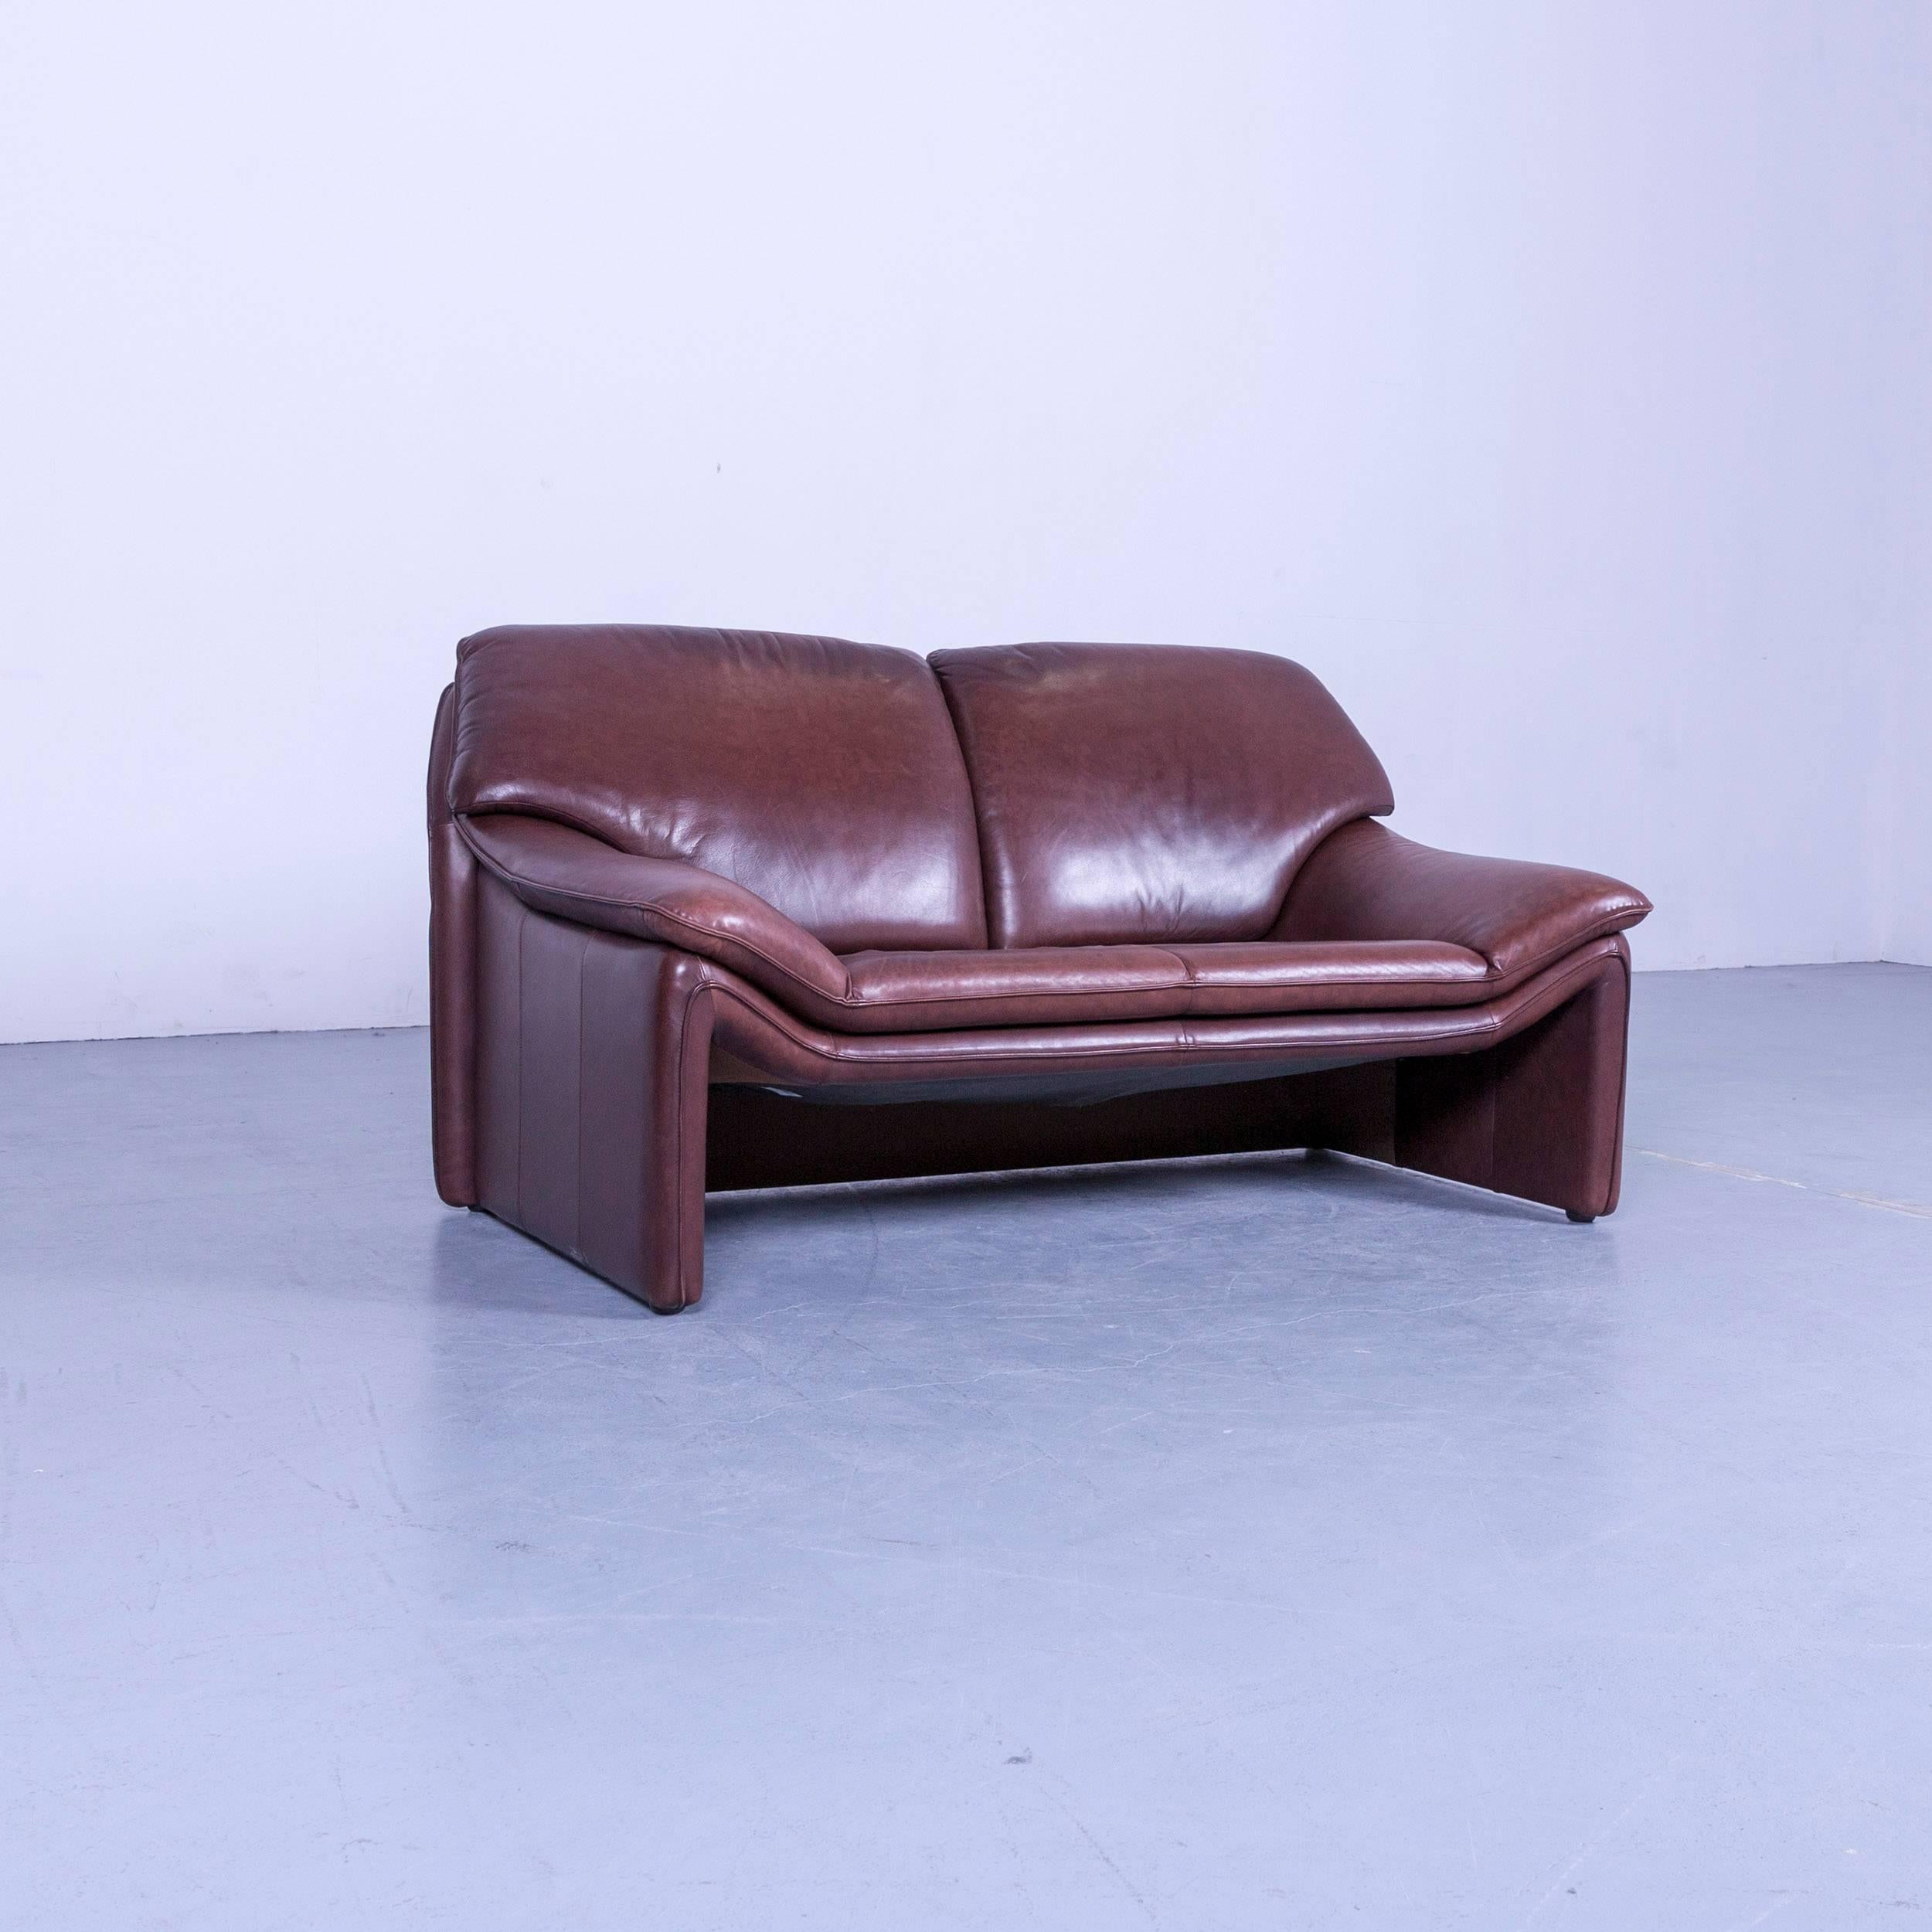 We offer delivery options to most destinations on earth. Find our shipping quotes at the bottom of this page in the shipping section.

An Laauser Designer Leather Sofa Black Two-Seater 

Shipping:

An on point shipping process is our priority. 

For